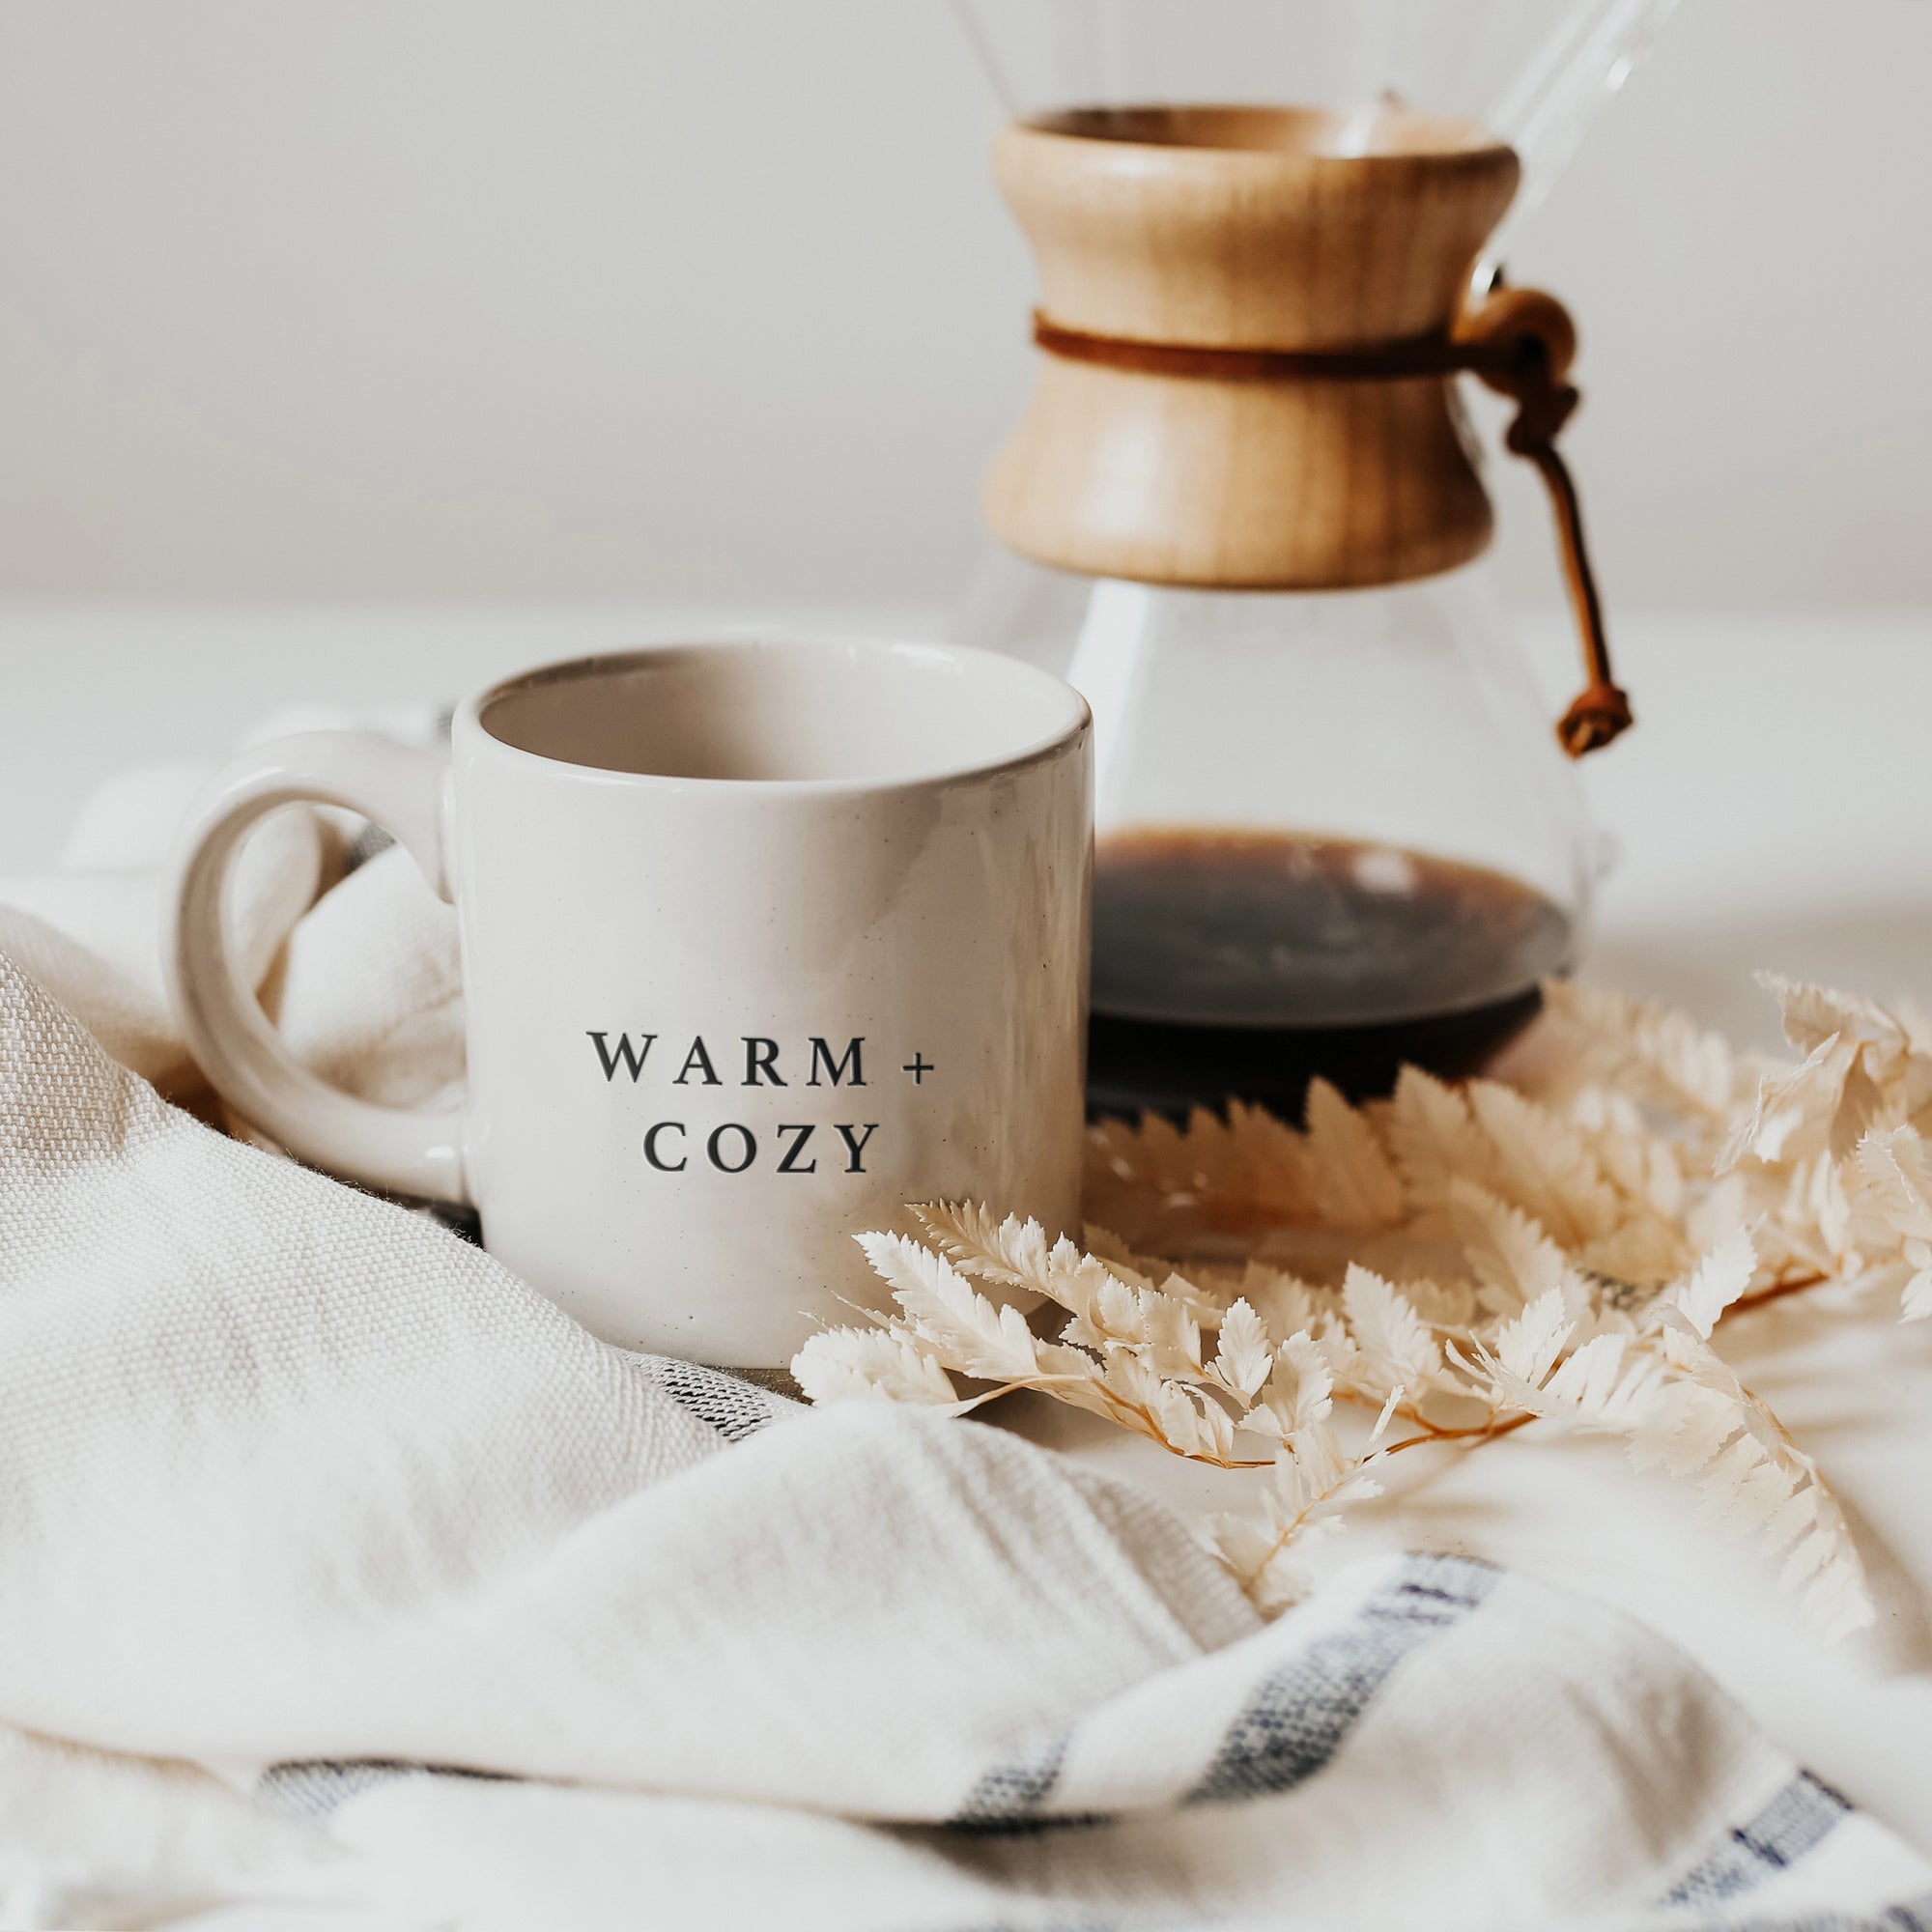 Cream and brown stoneware mug with black text 'warm + cozy' on the front, in front of coffee cafetiere, on striped tea towel.